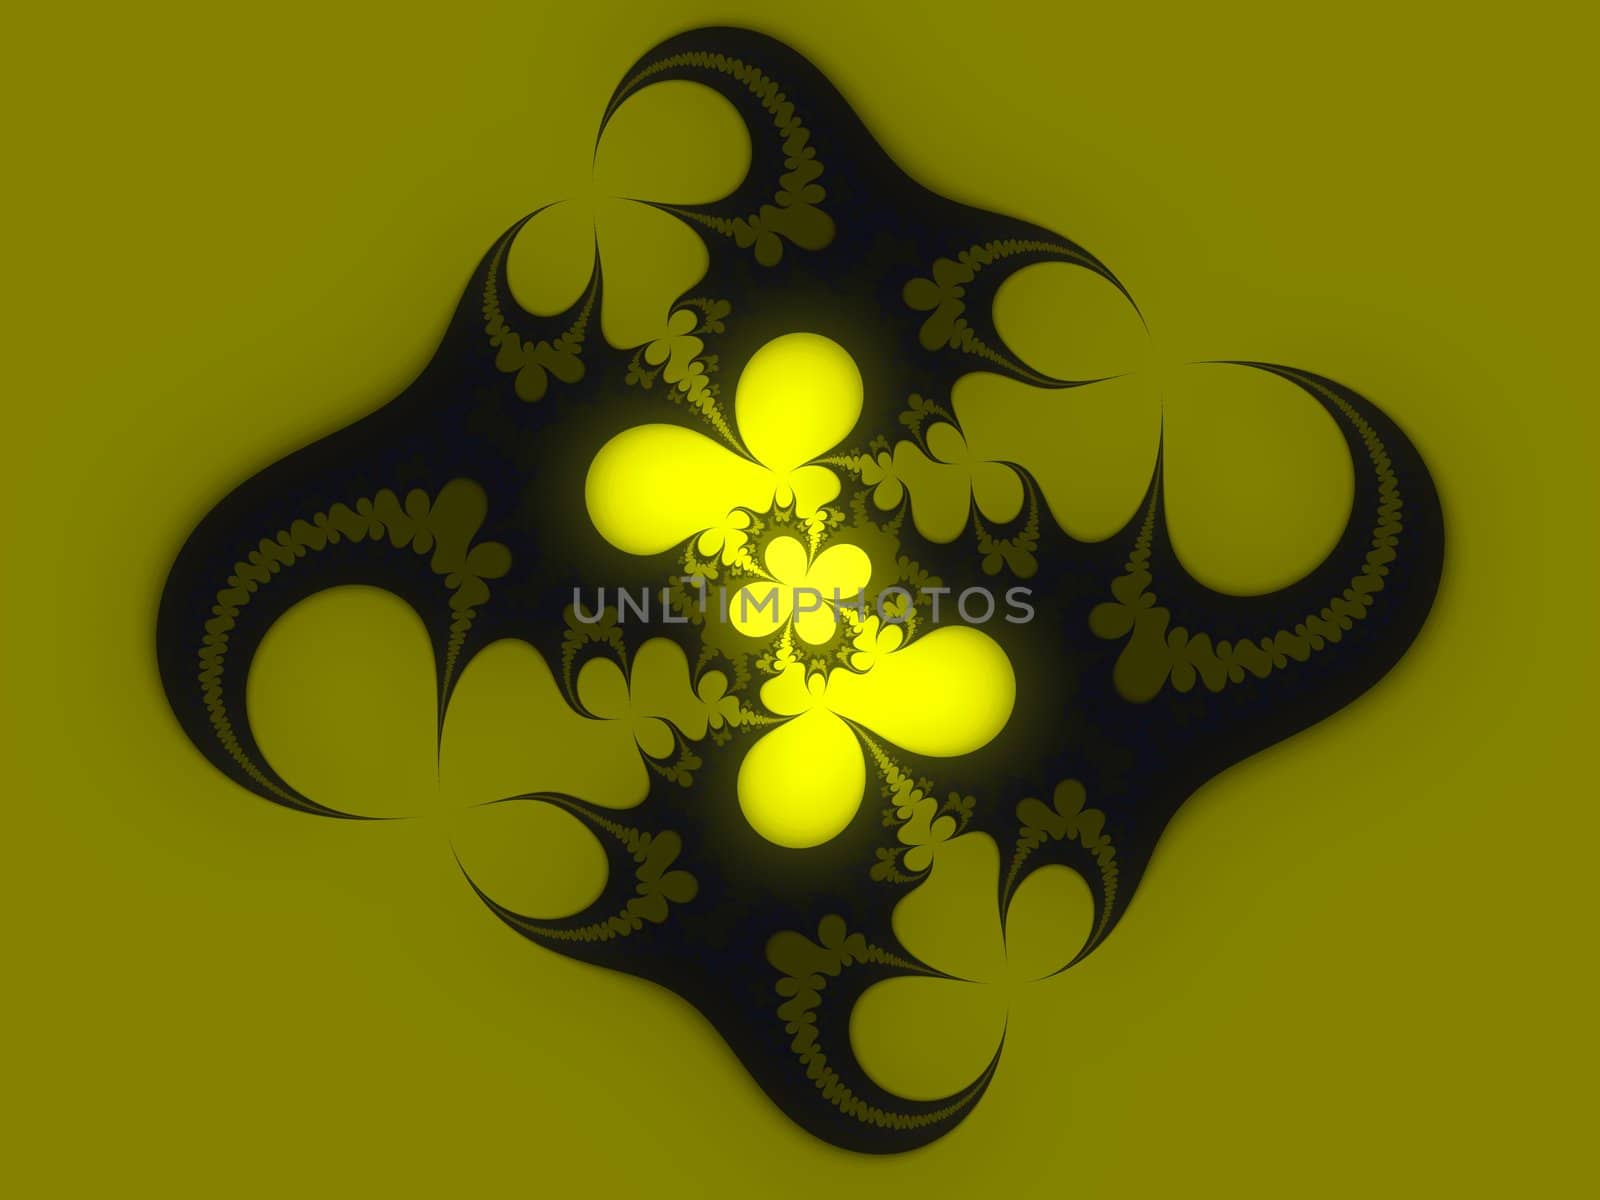 Illustrated black design over an olive and yellow background